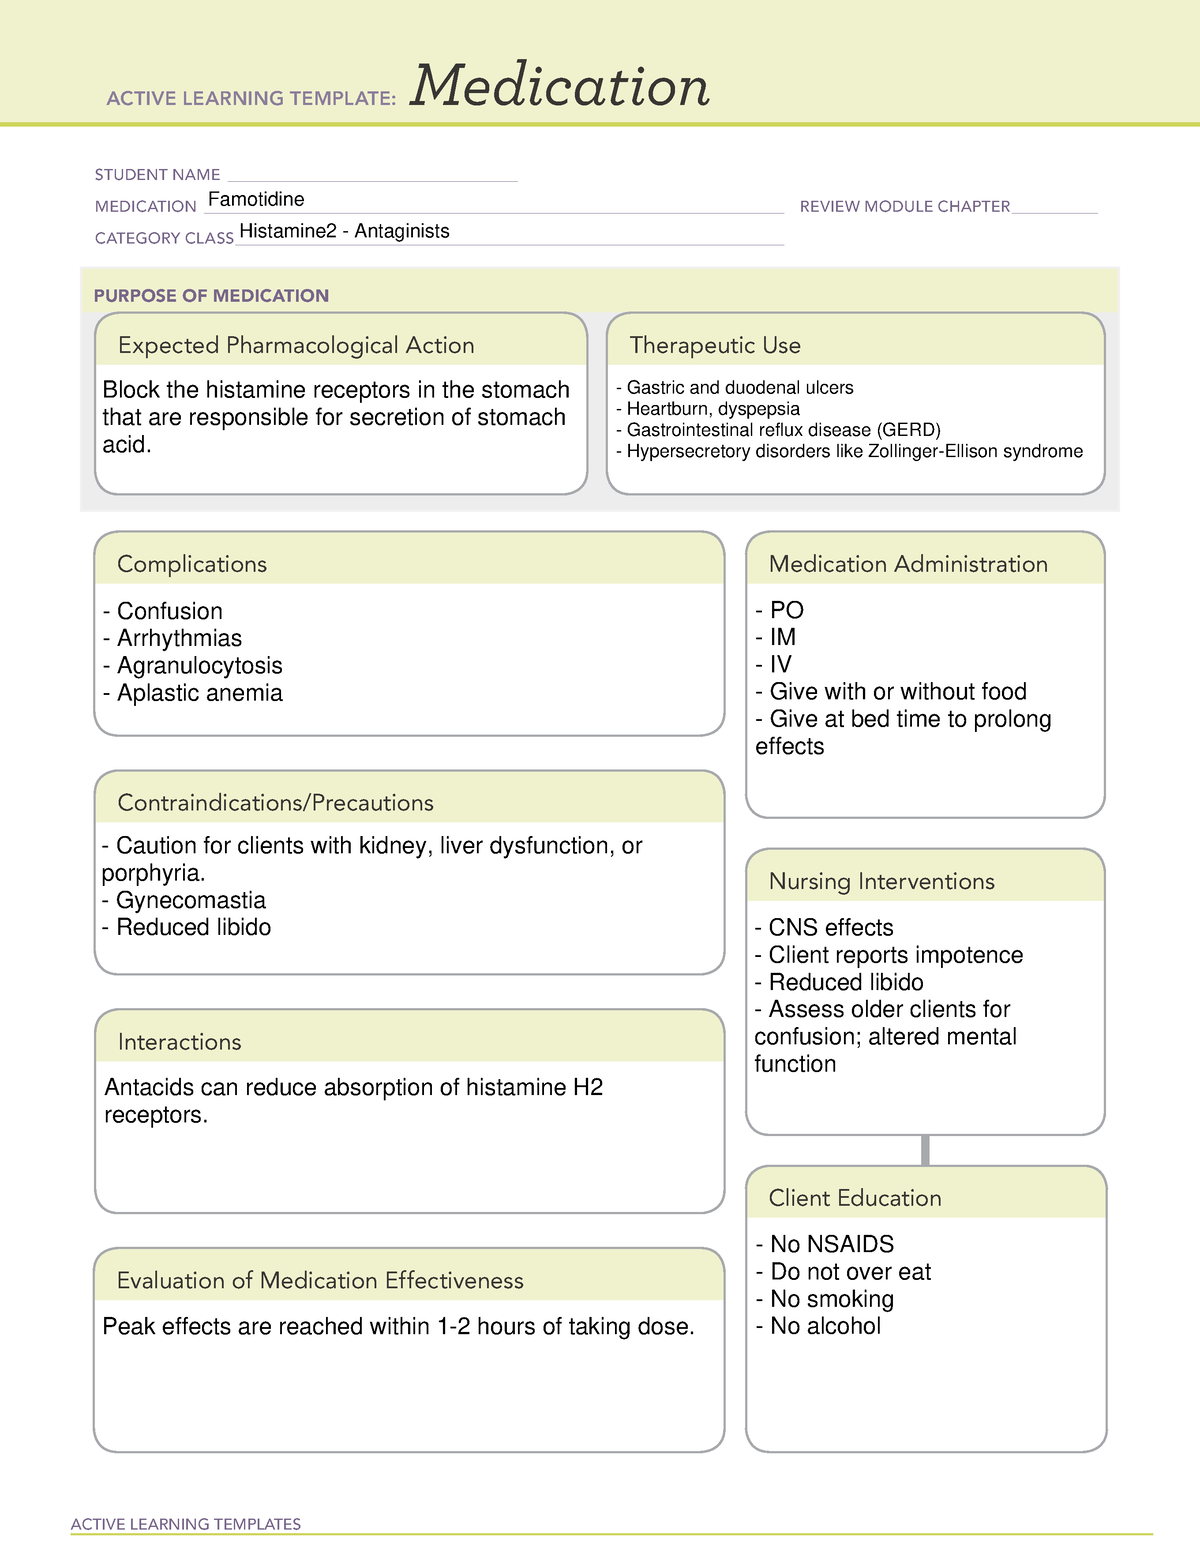 Famotidine Medication definition and indications ACTIVE LEARNING